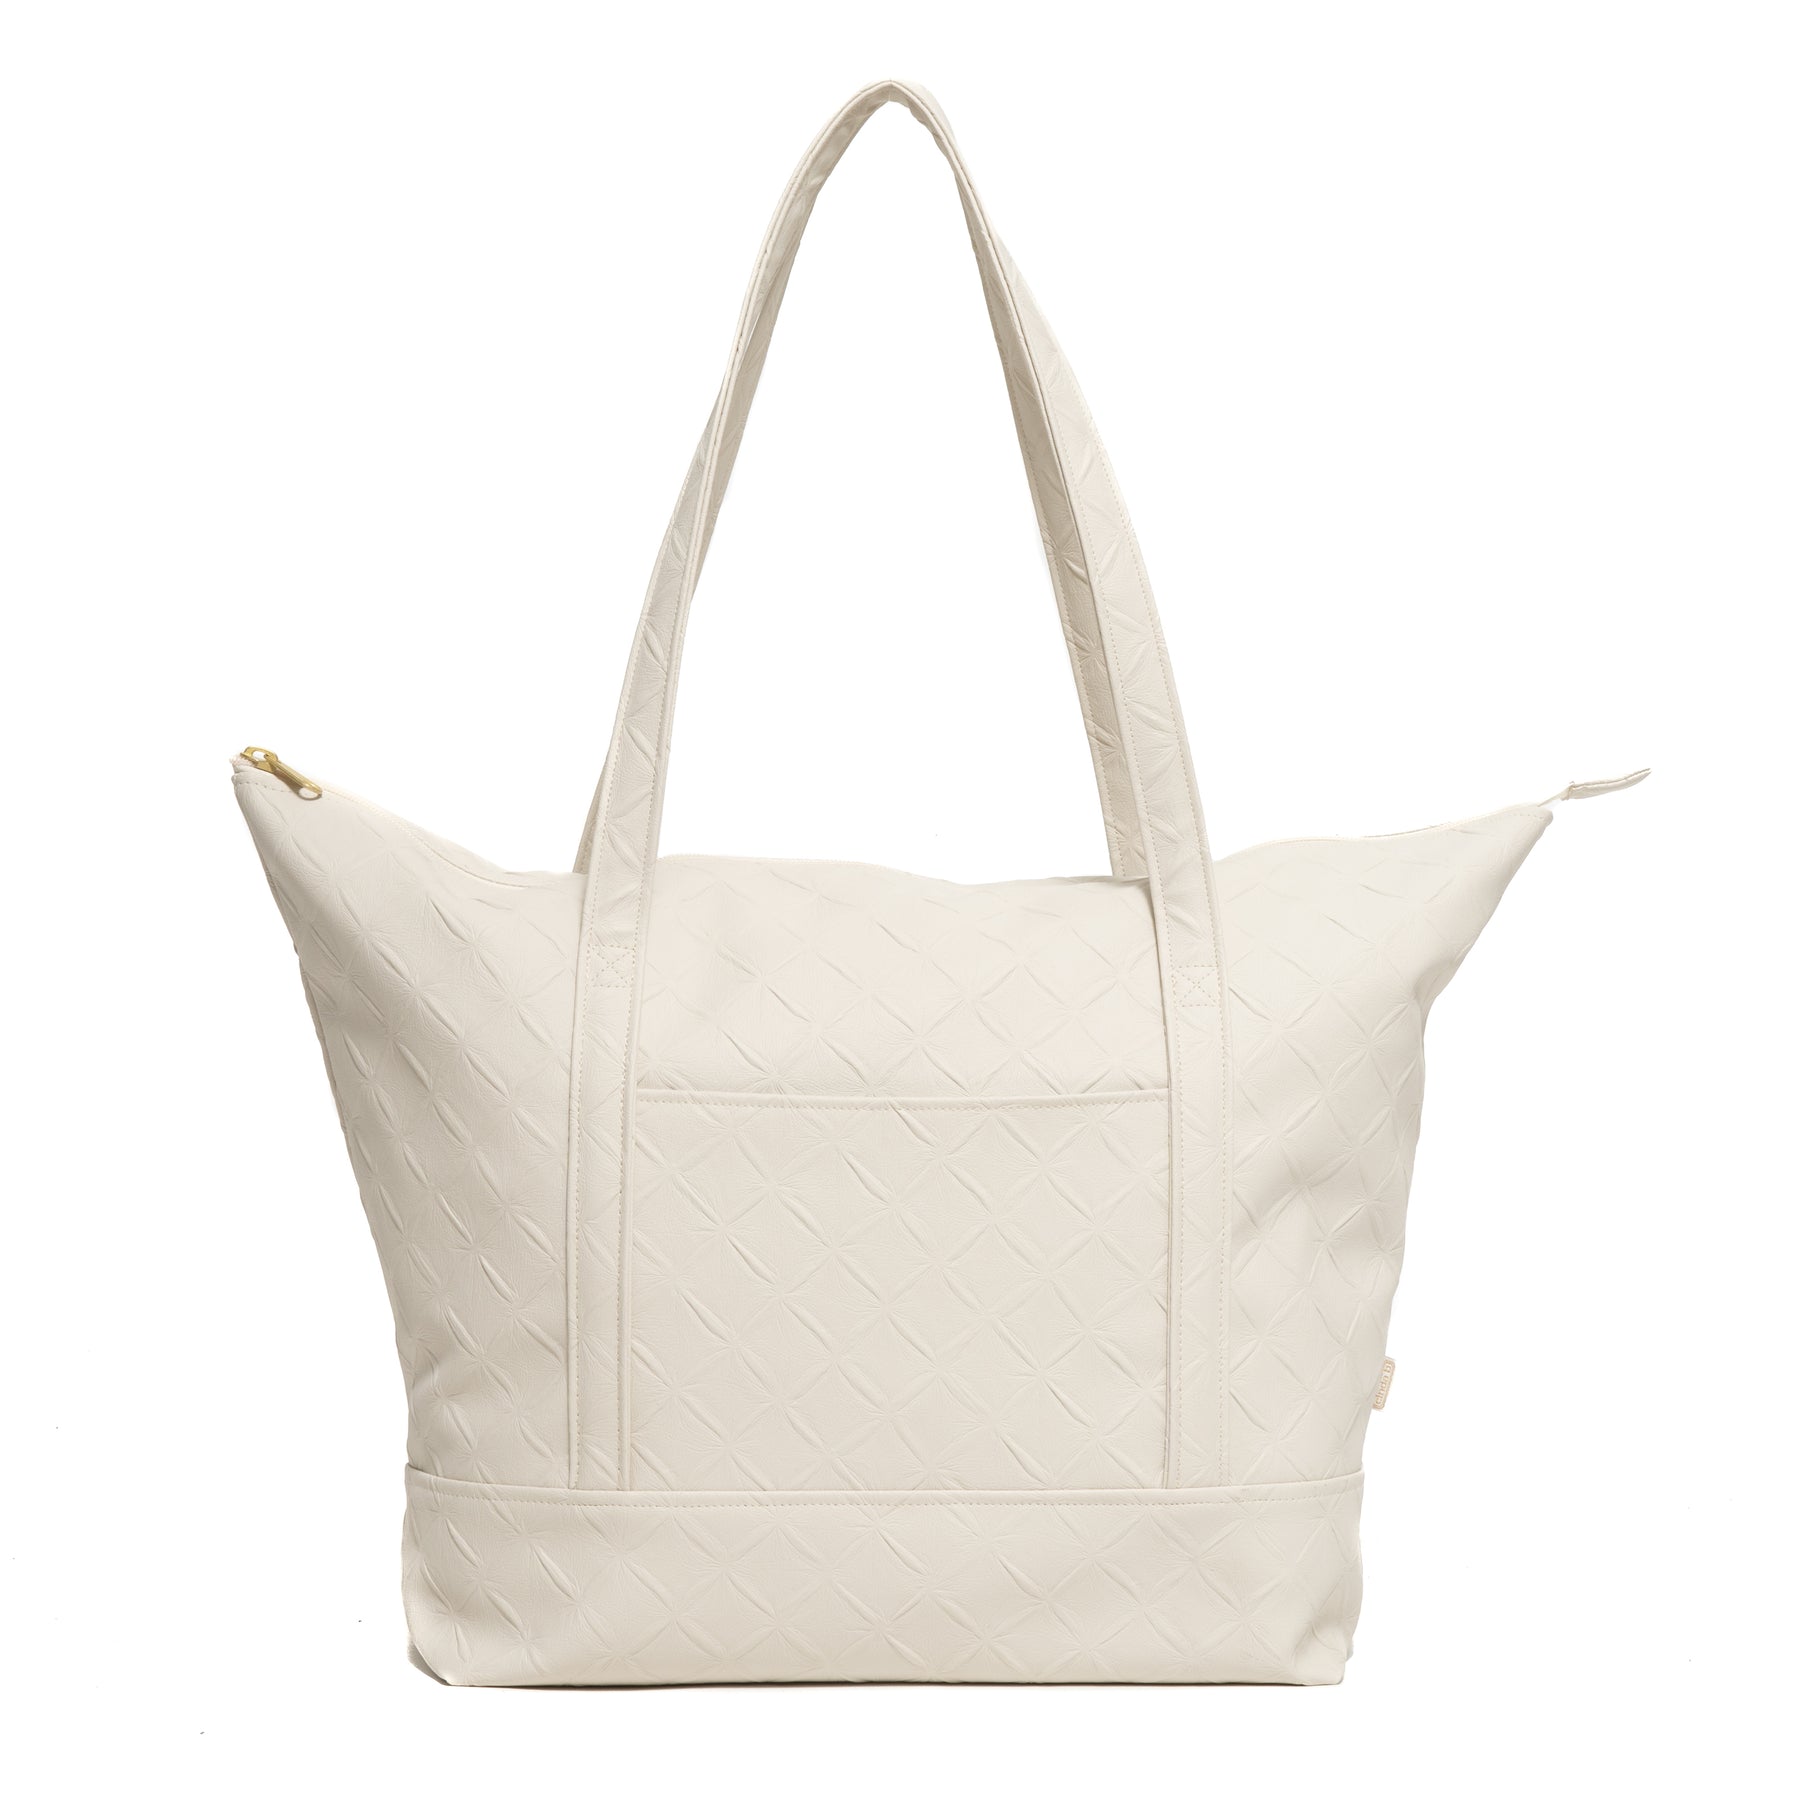 LUXE B Canvas Tote Bag